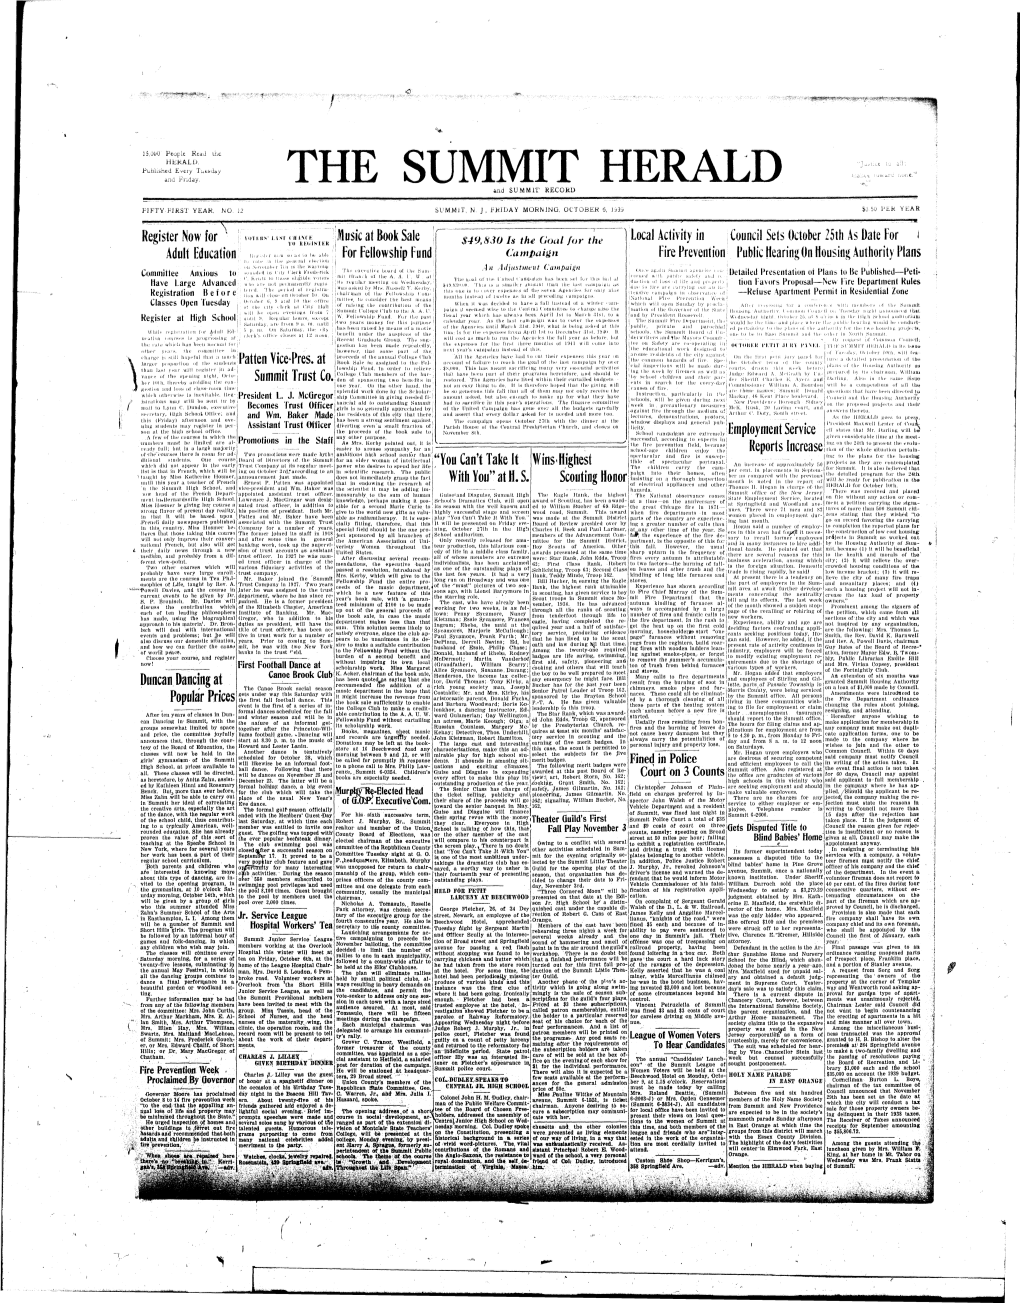 THE SUMMIT HERALD and SUMMIT RECORD